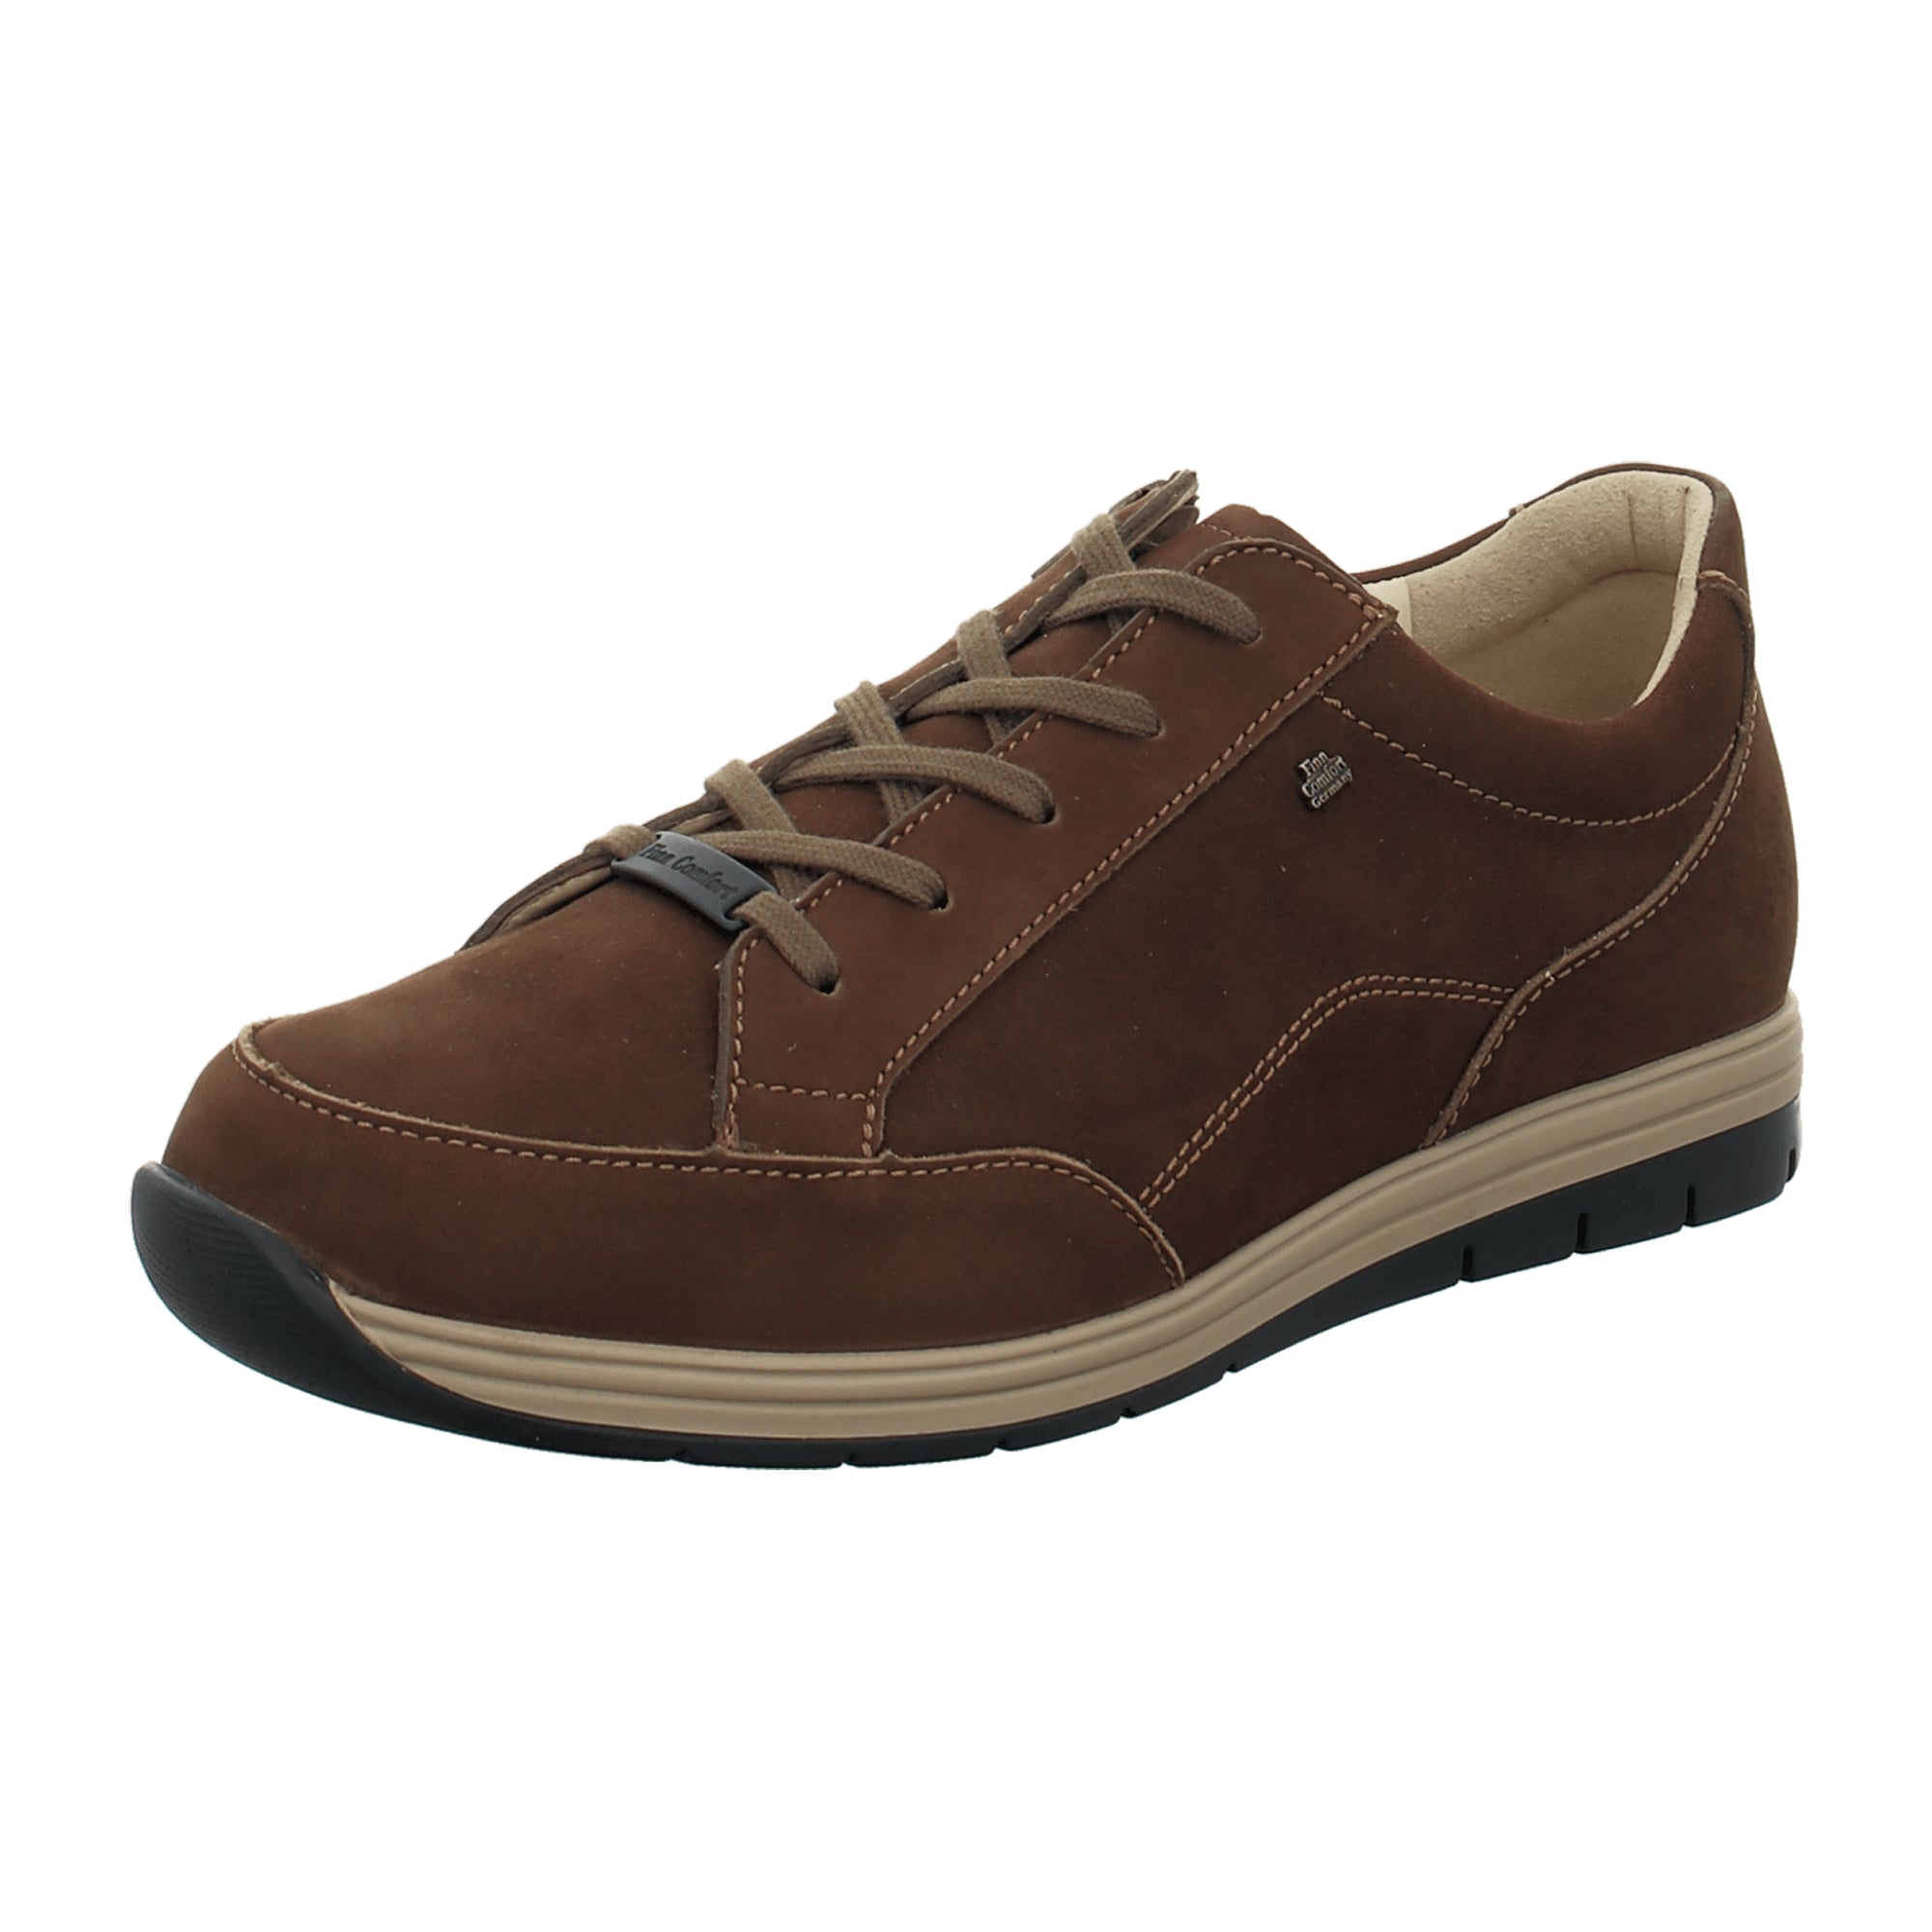 Finn Comfort Osorno Men's Comfort Shoes - Chestnut Brown | Durable Leather Lace-Up Shoes